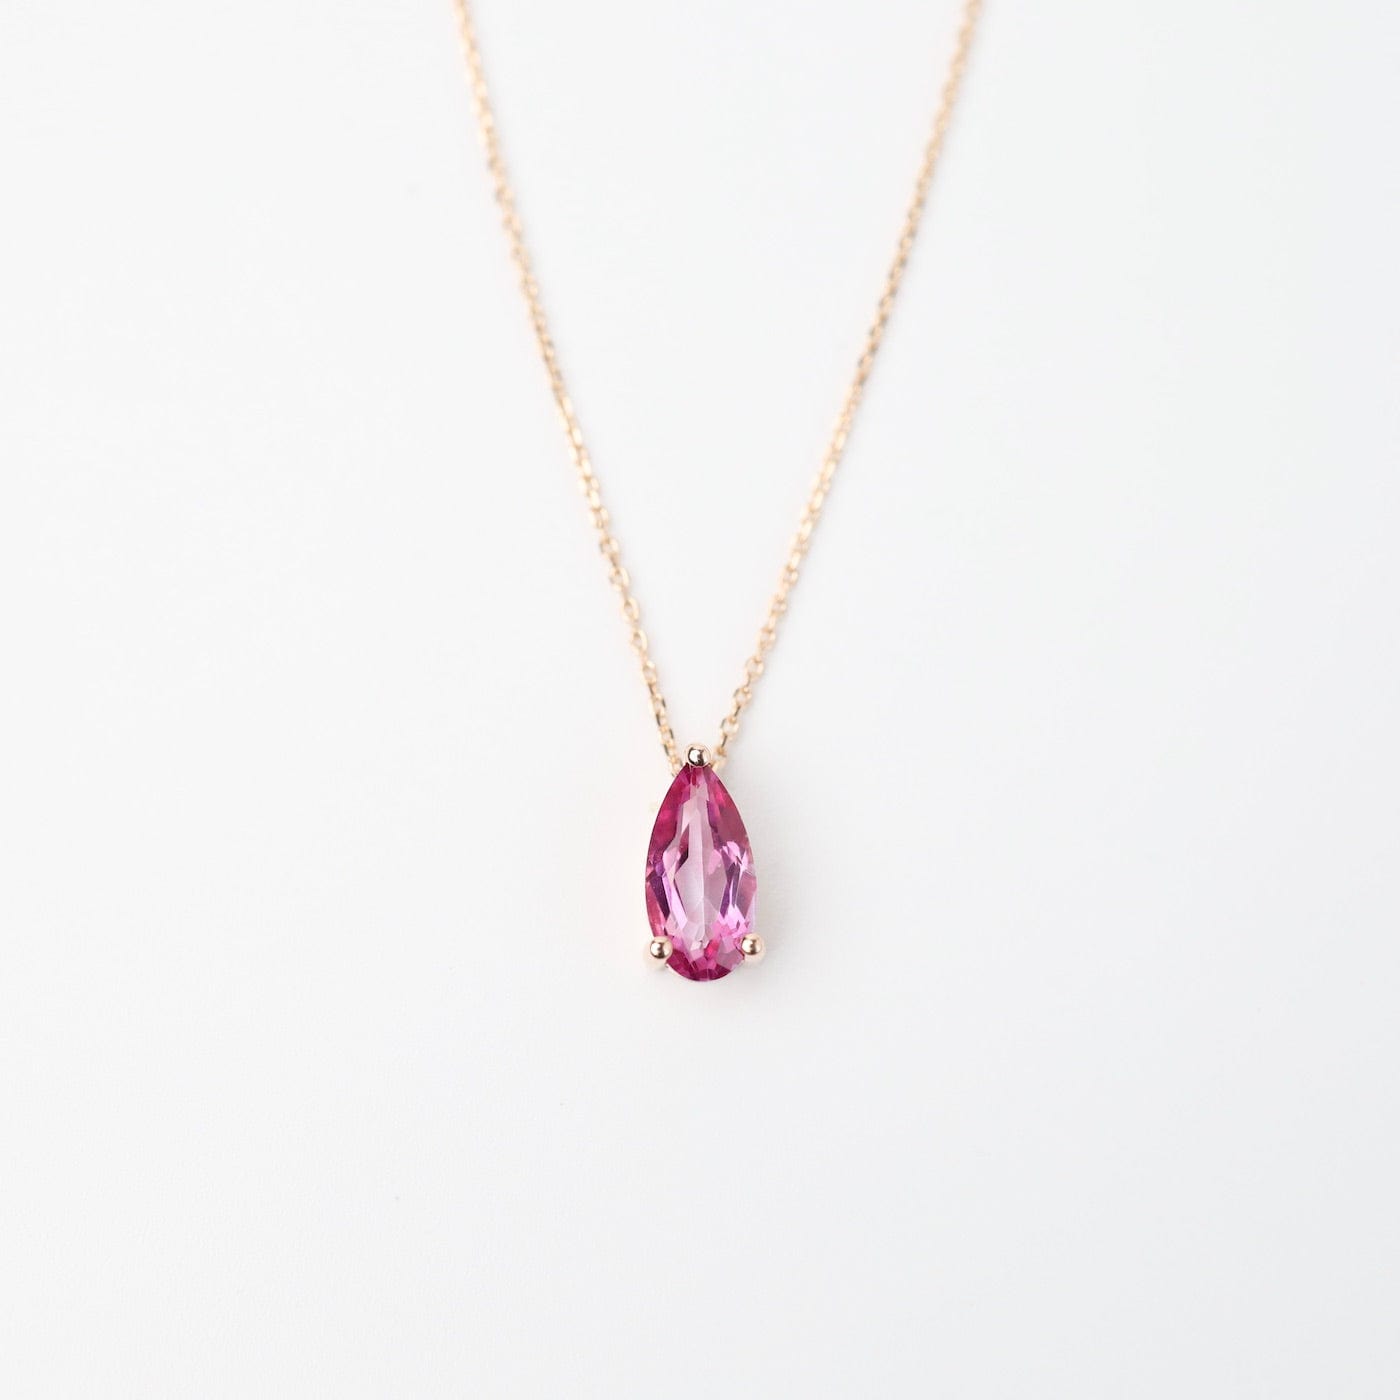 Rose Gold Pear Shaped Pink Topaz Necklace – Dandelion Jewelry